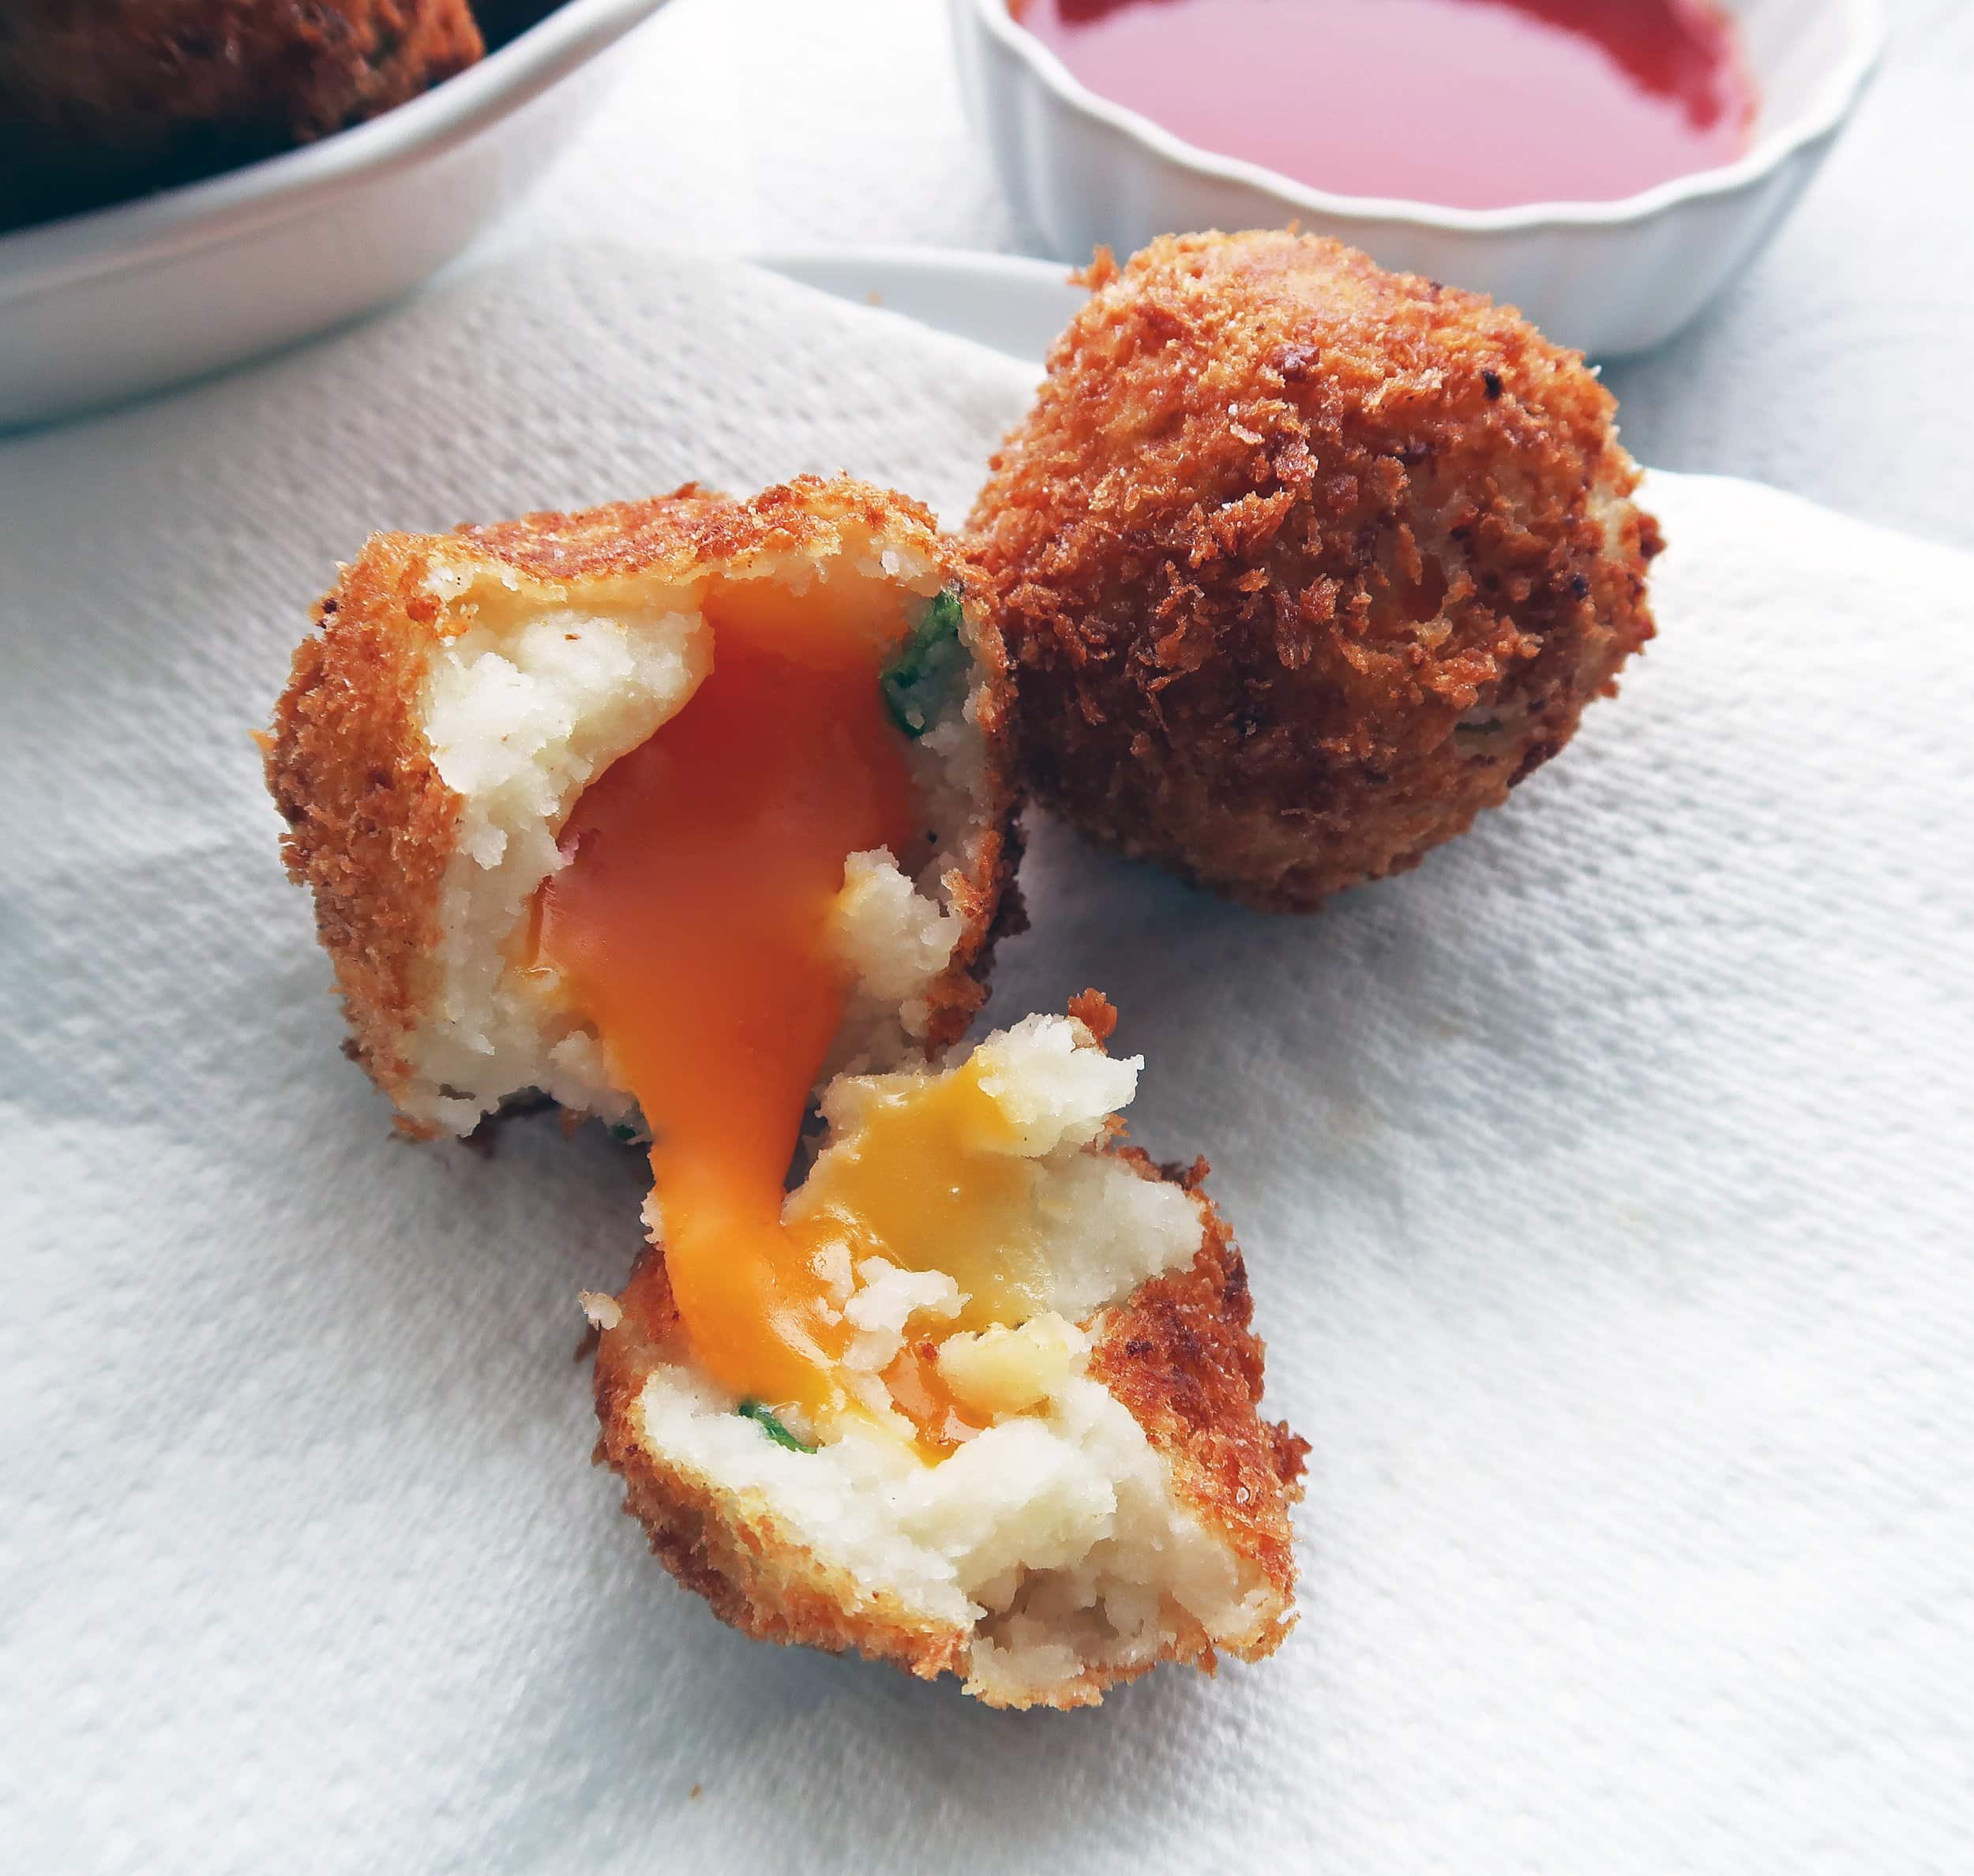 The inside of a crispy mashed potato balls showing melted cheese.